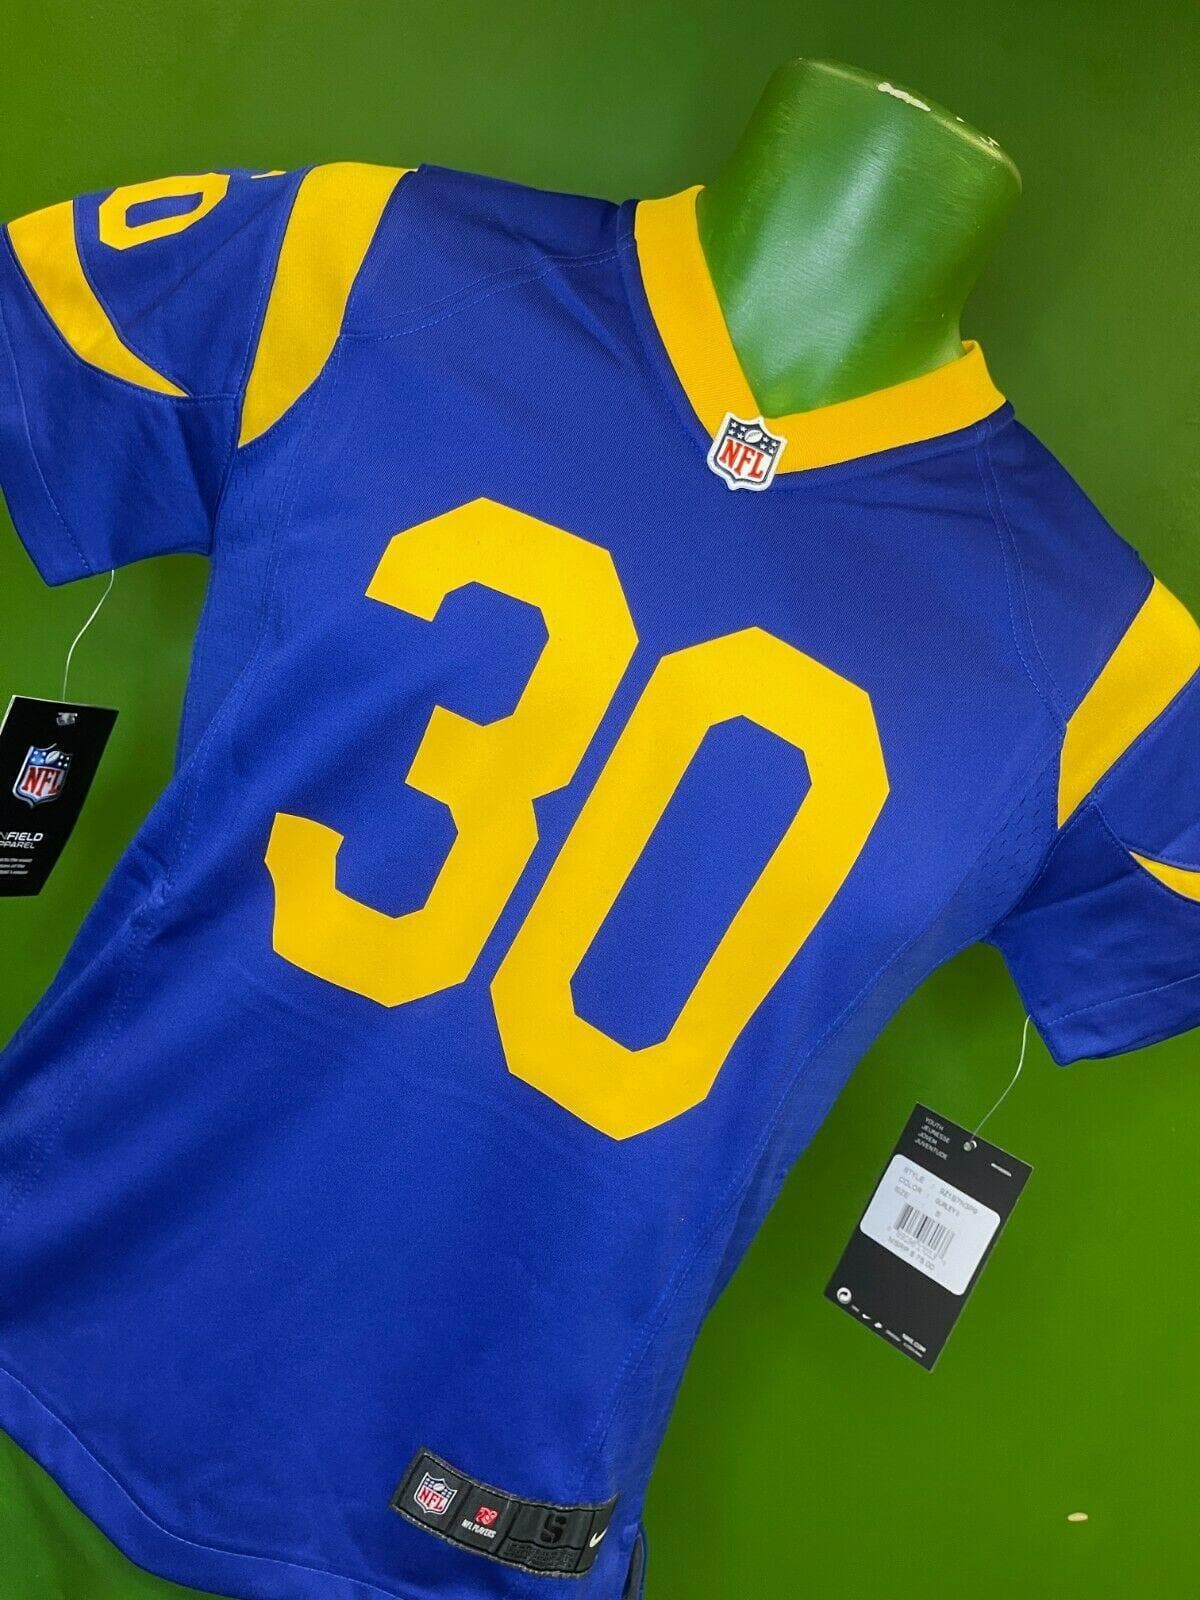 NFL Los Angeles Rams Todd Gurley #30 Game Jersey Youth Small NWT